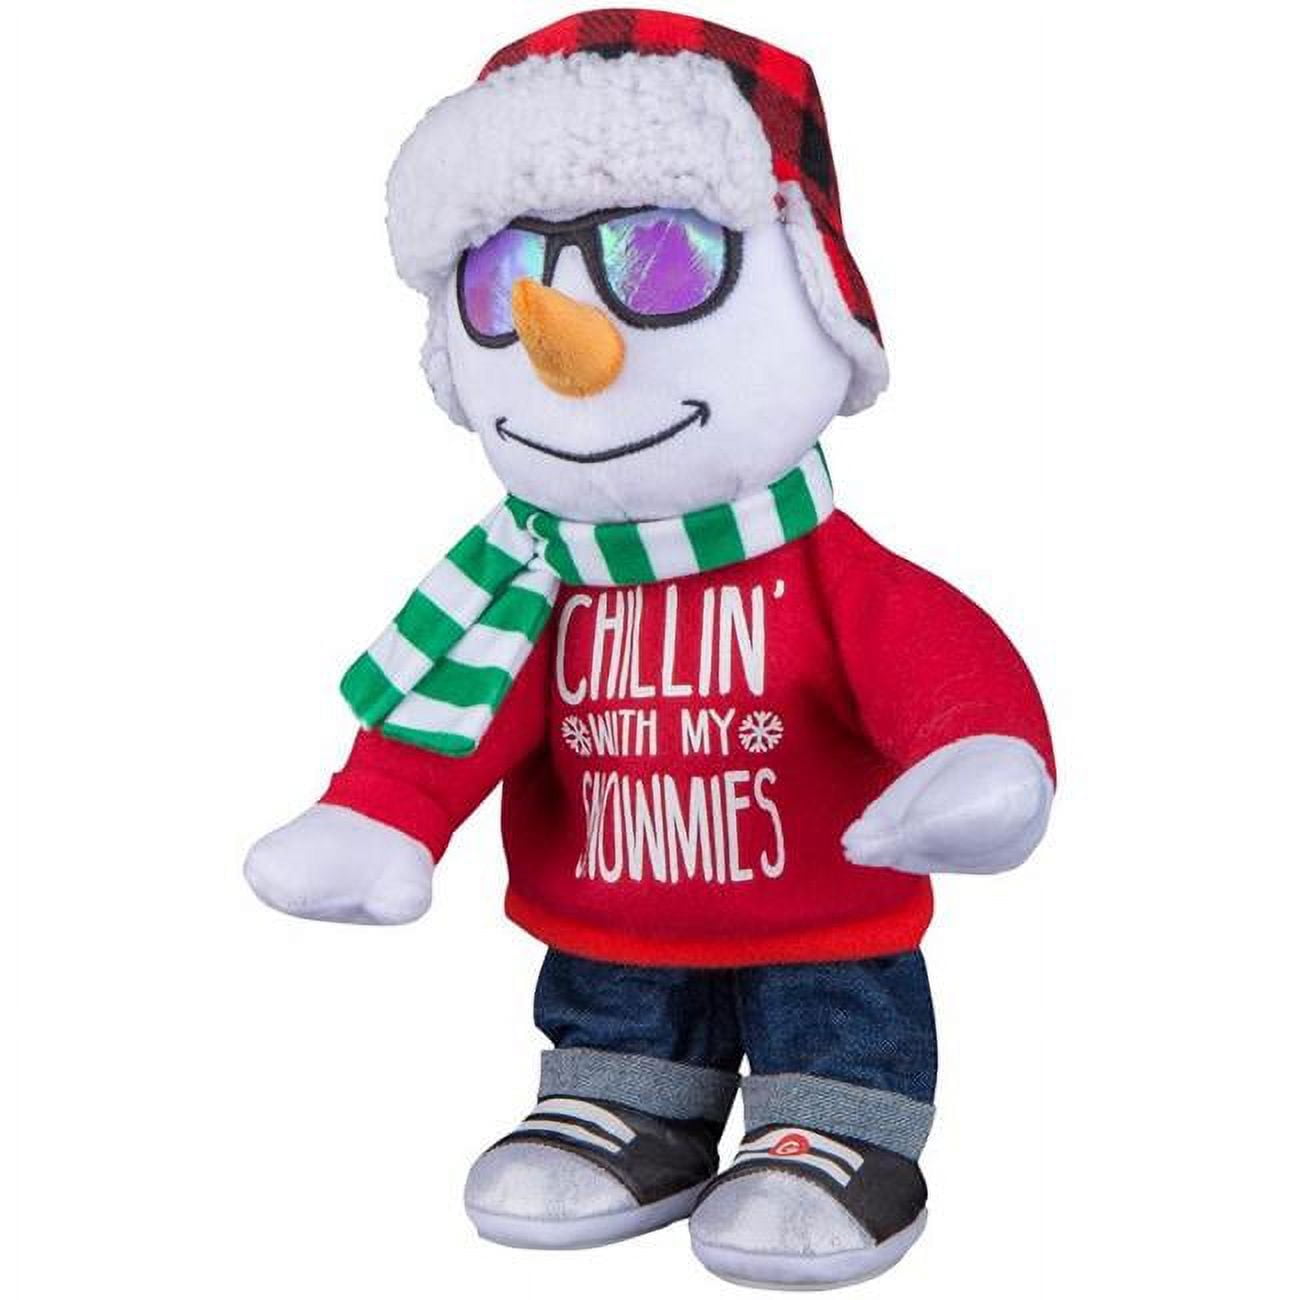 Gemmy 9086287 14.17 in. Chillin with My Snowmies Animated Decor, Multi Color - Pack of 6 -  Gemmy Industries